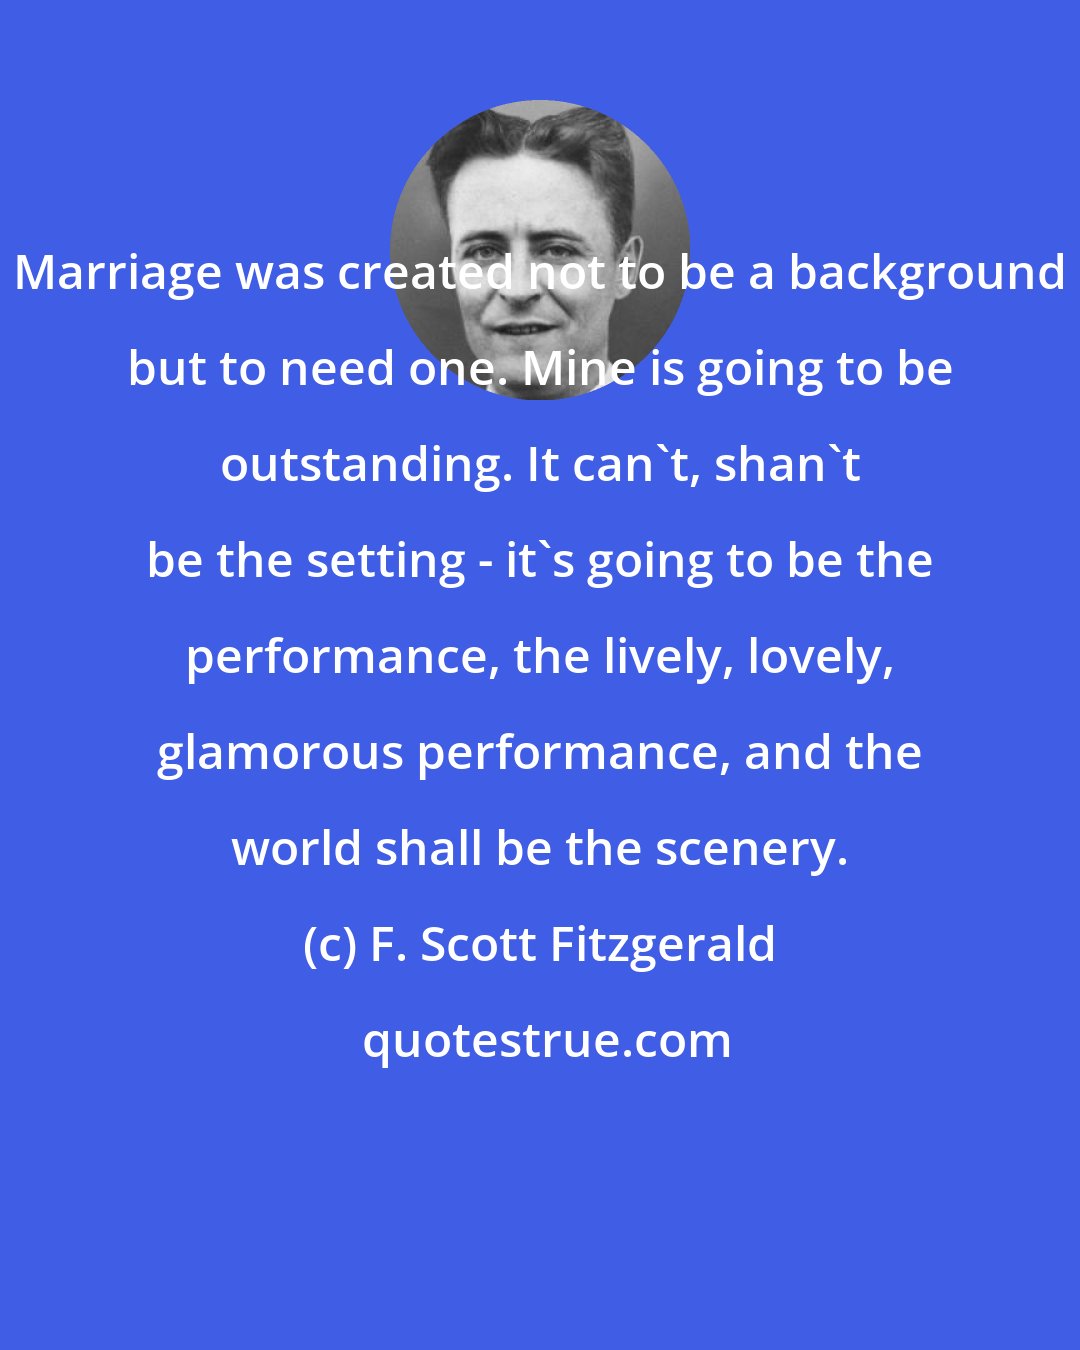 F. Scott Fitzgerald: Marriage was created not to be a background but to need one. Mine is going to be outstanding. It can't, shan't be the setting - it's going to be the performance, the lively, lovely, glamorous performance, and the world shall be the scenery.